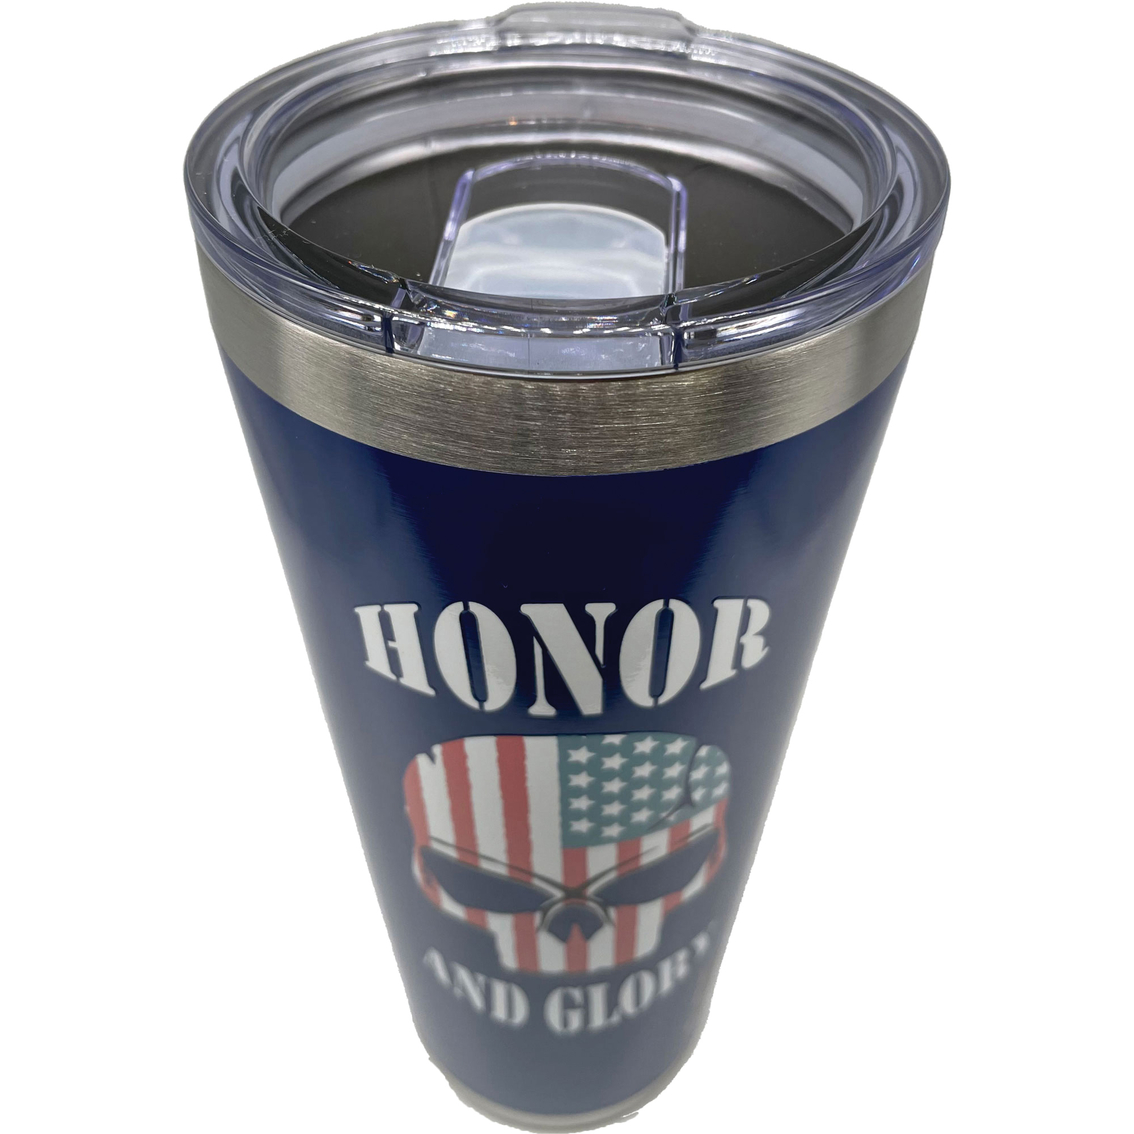 Uniformed Honor and Glory 32 oz. Tumbler - Image 3 of 4